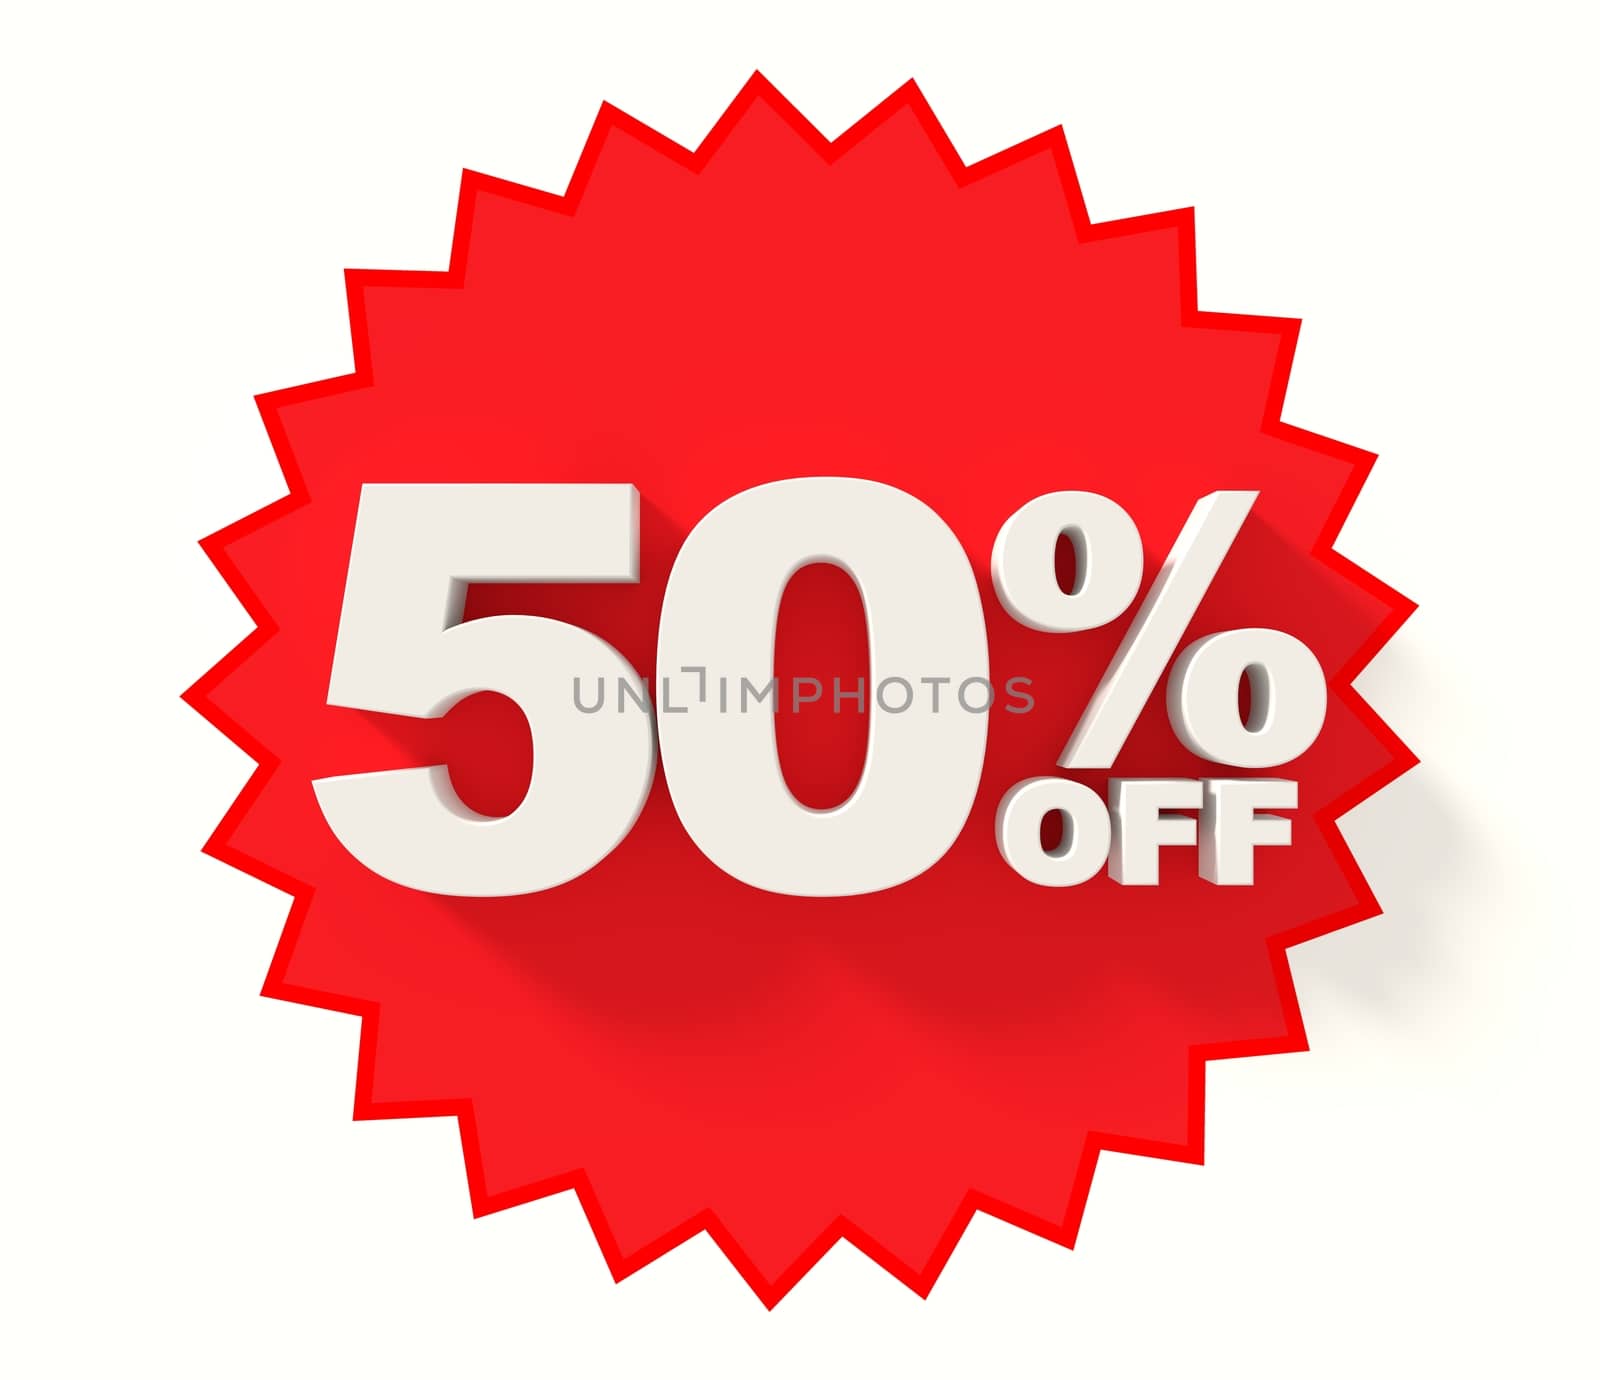 Red star with 50% sale sign by Barbraford